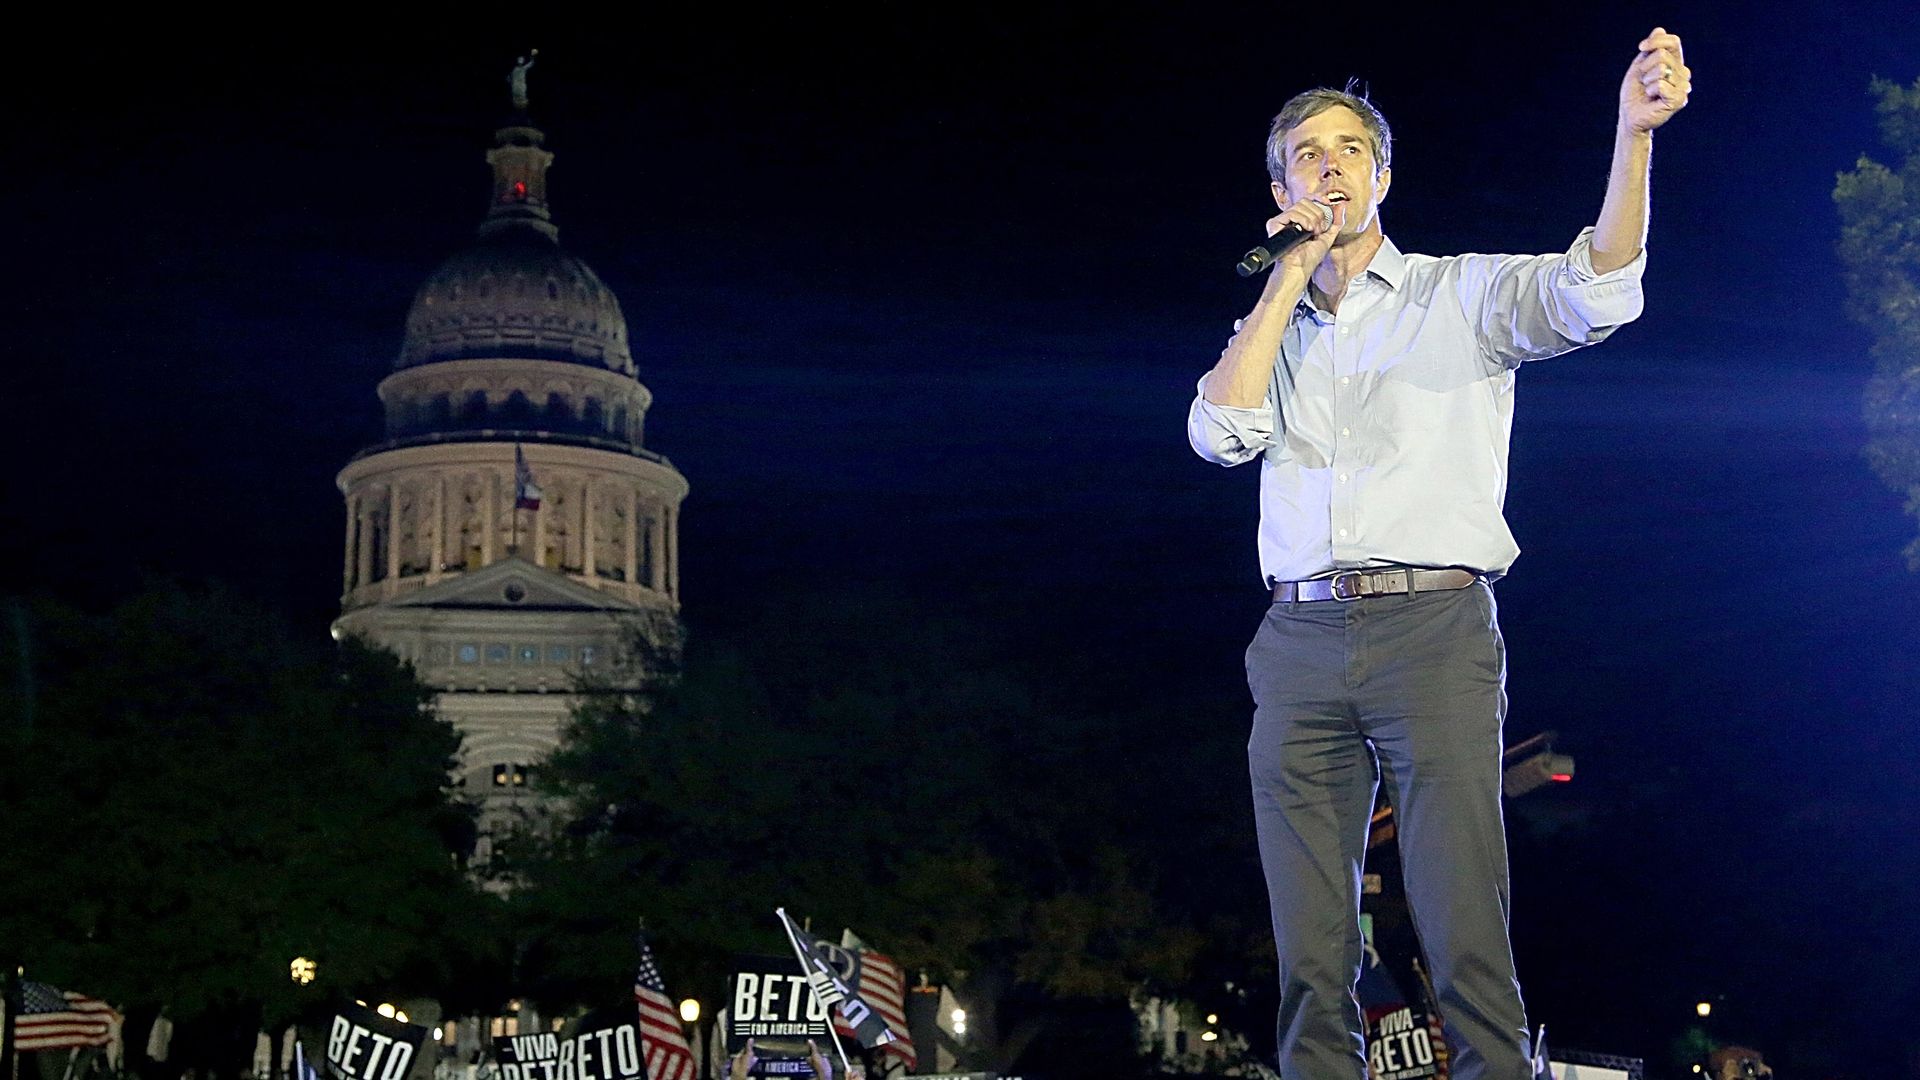 A photo of Beto O'Rourke standing on a stage with a crowd and the Texas Capitol in the background.